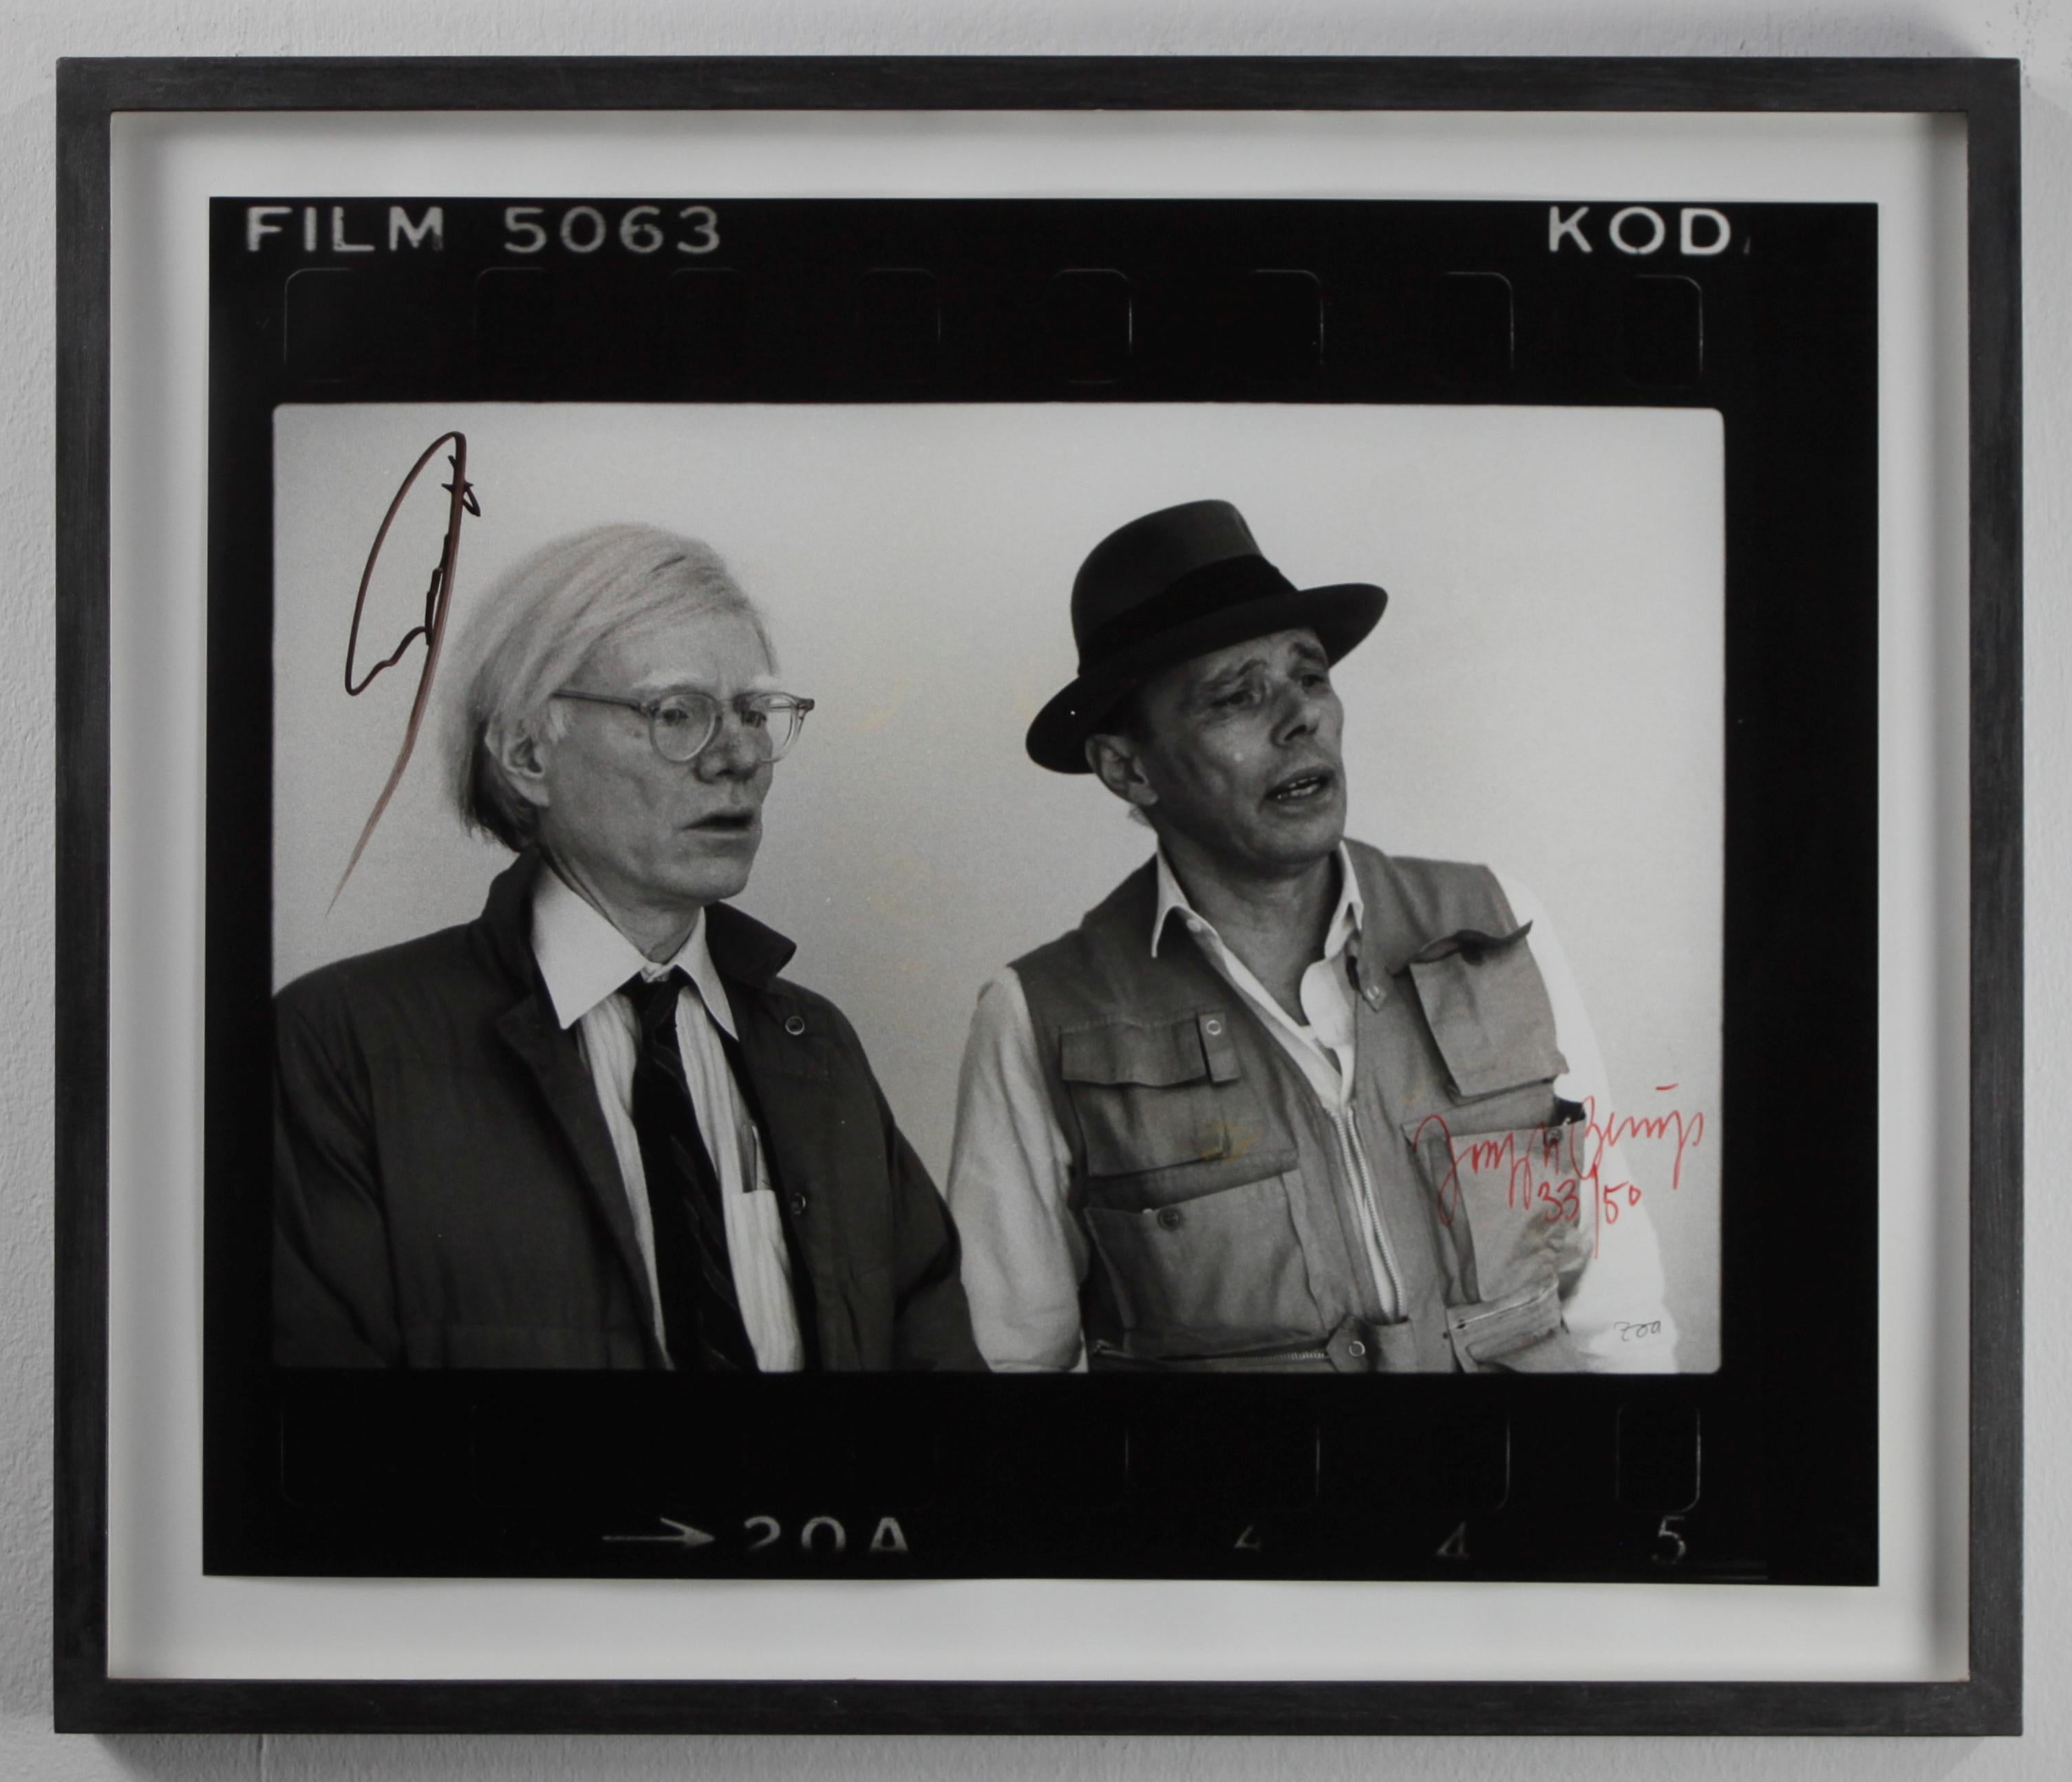 Beuys & Warhol, New York 1979, photography by ZOA, one of nine signed by Warhol